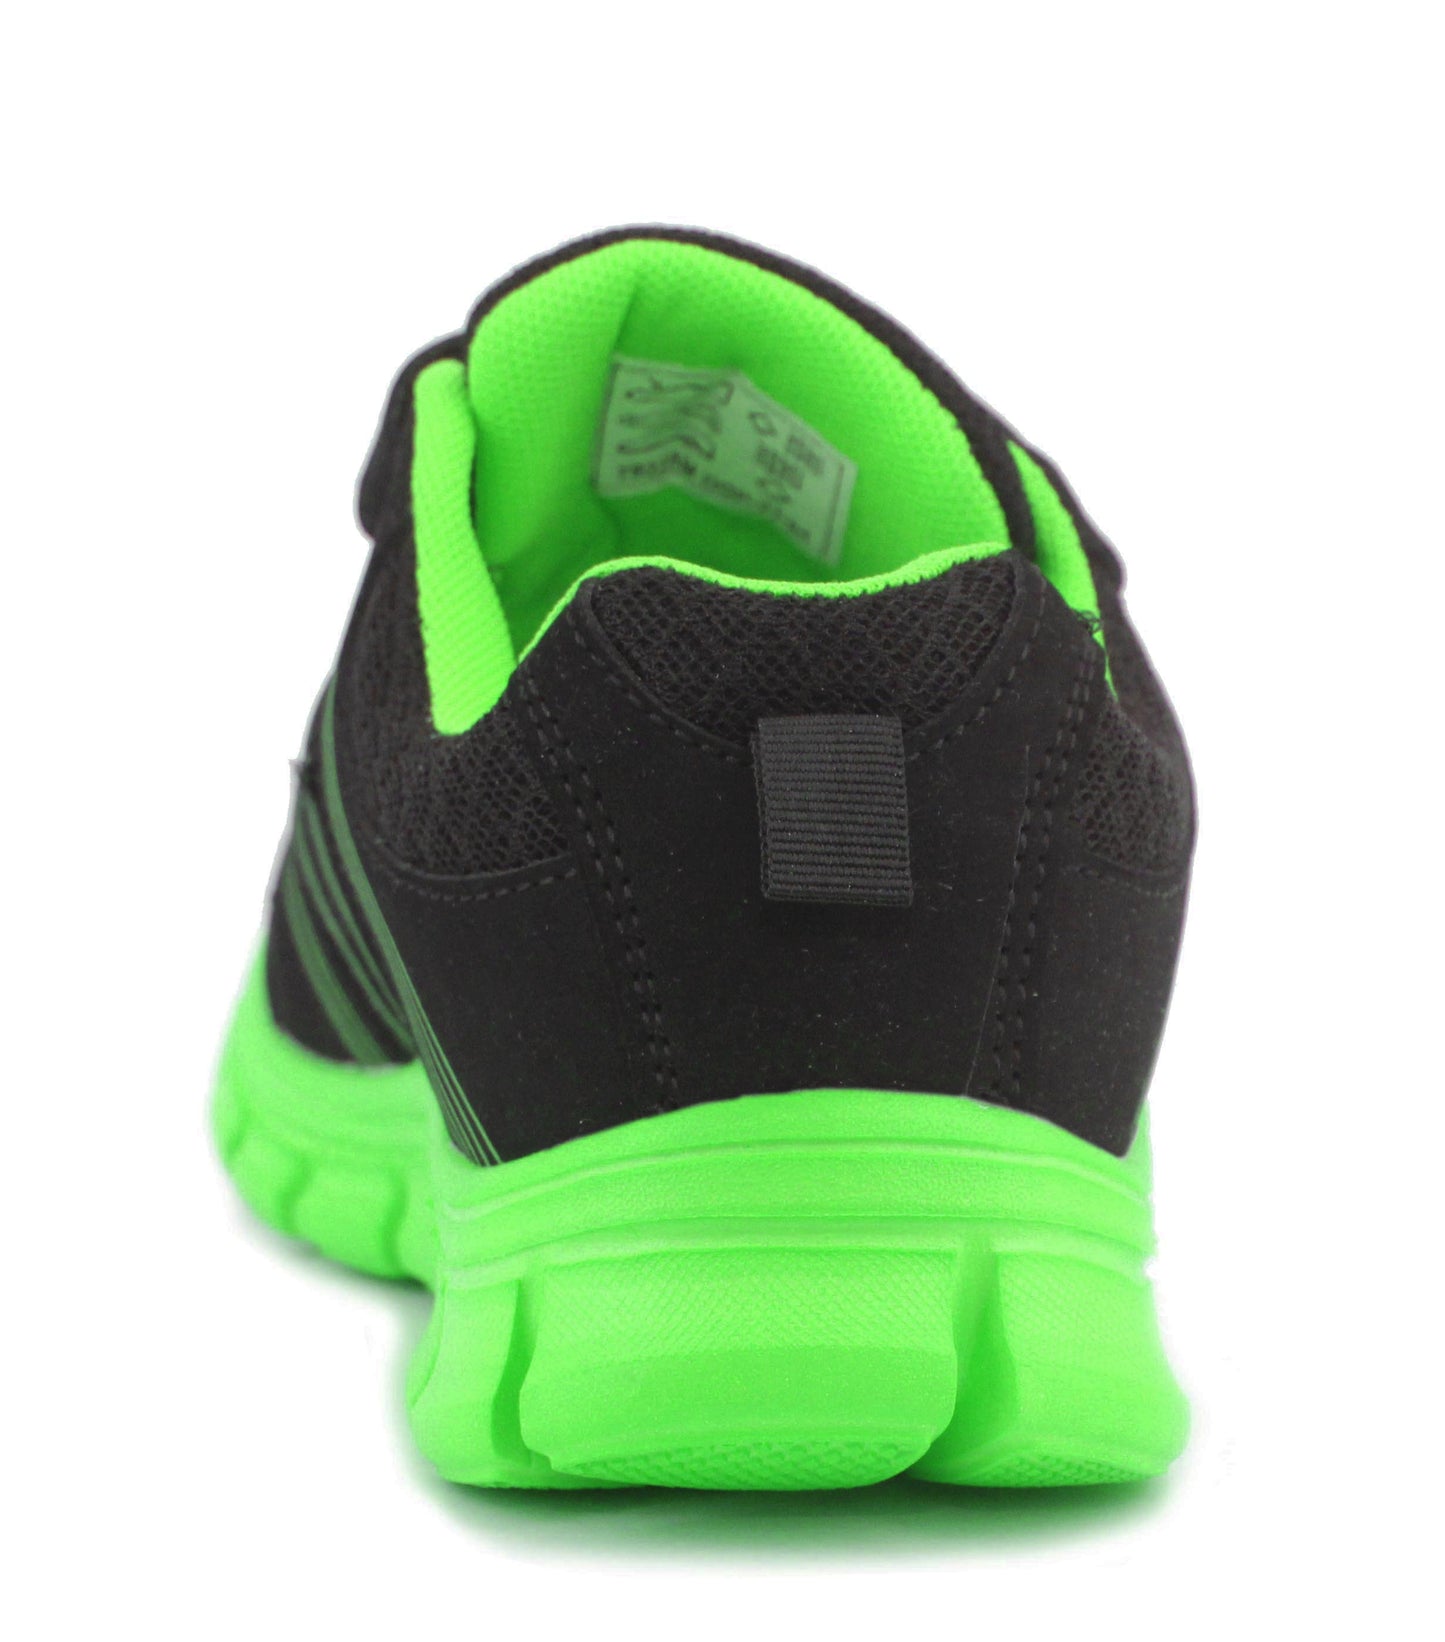 Kids Black Neon Green Youth Super Lightweight EVA Double Touch Fasten Strap Sports Trainers